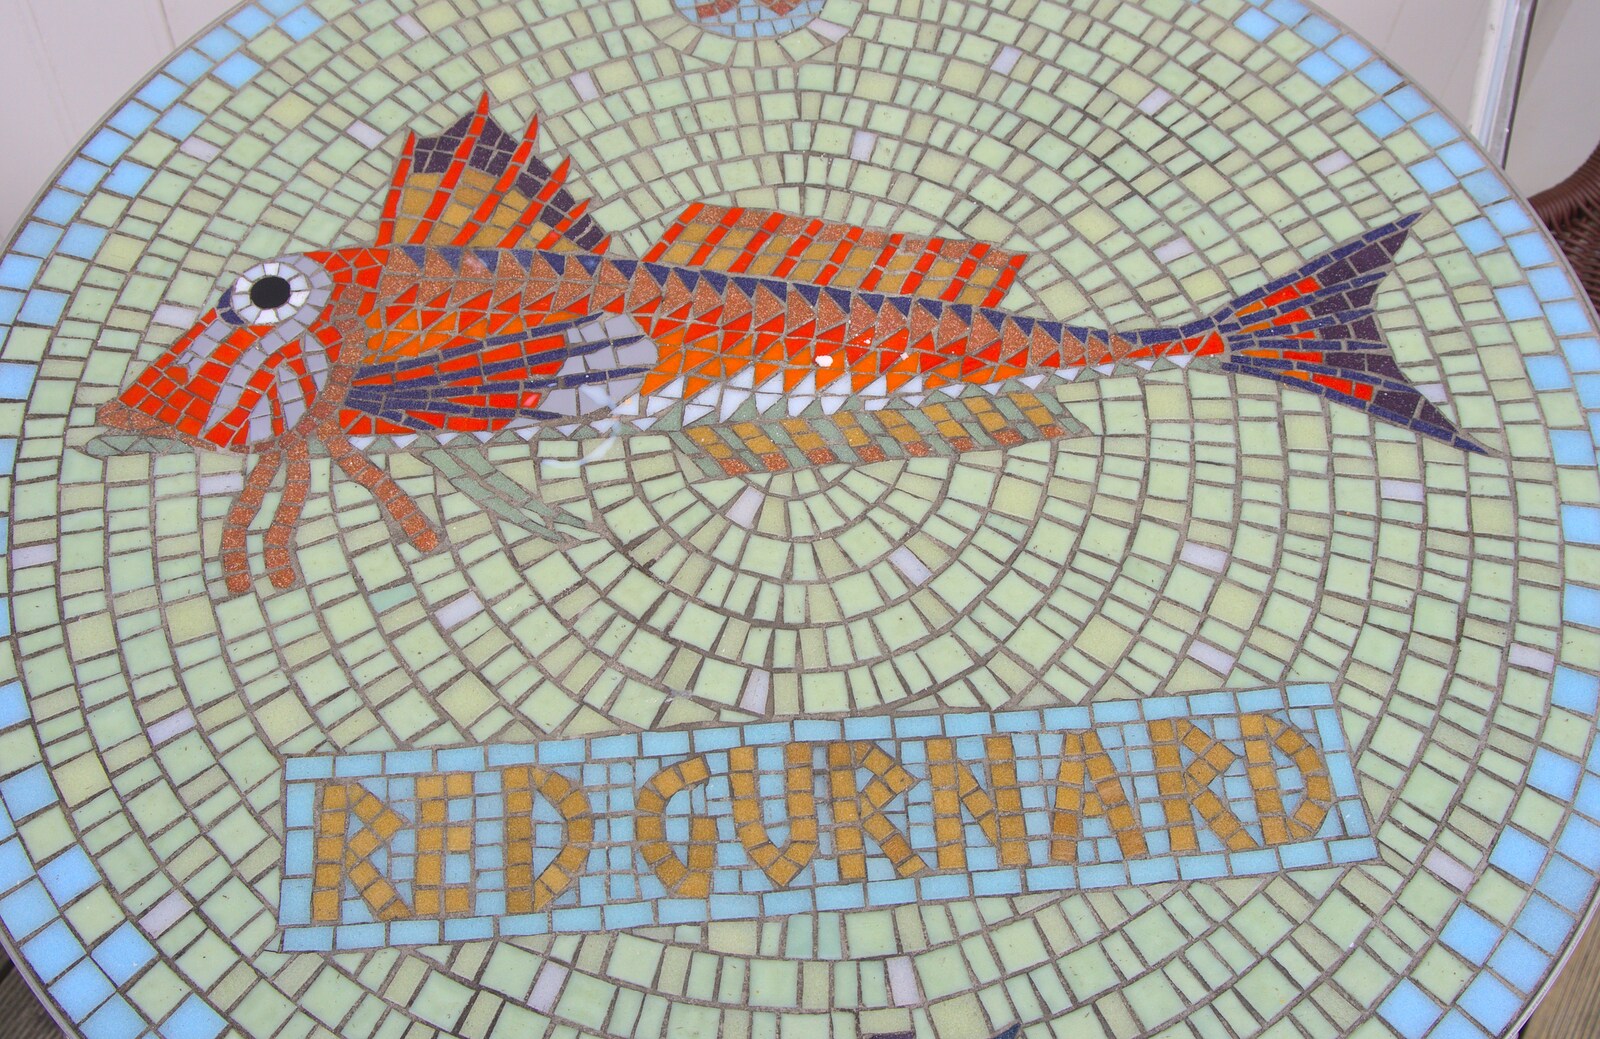 A nice Red Gurnard in mosaic table form from A Boxing Day Walk, and a Trip to the Beach, Thornham and Southwold, Suffolk - 26th December 2011